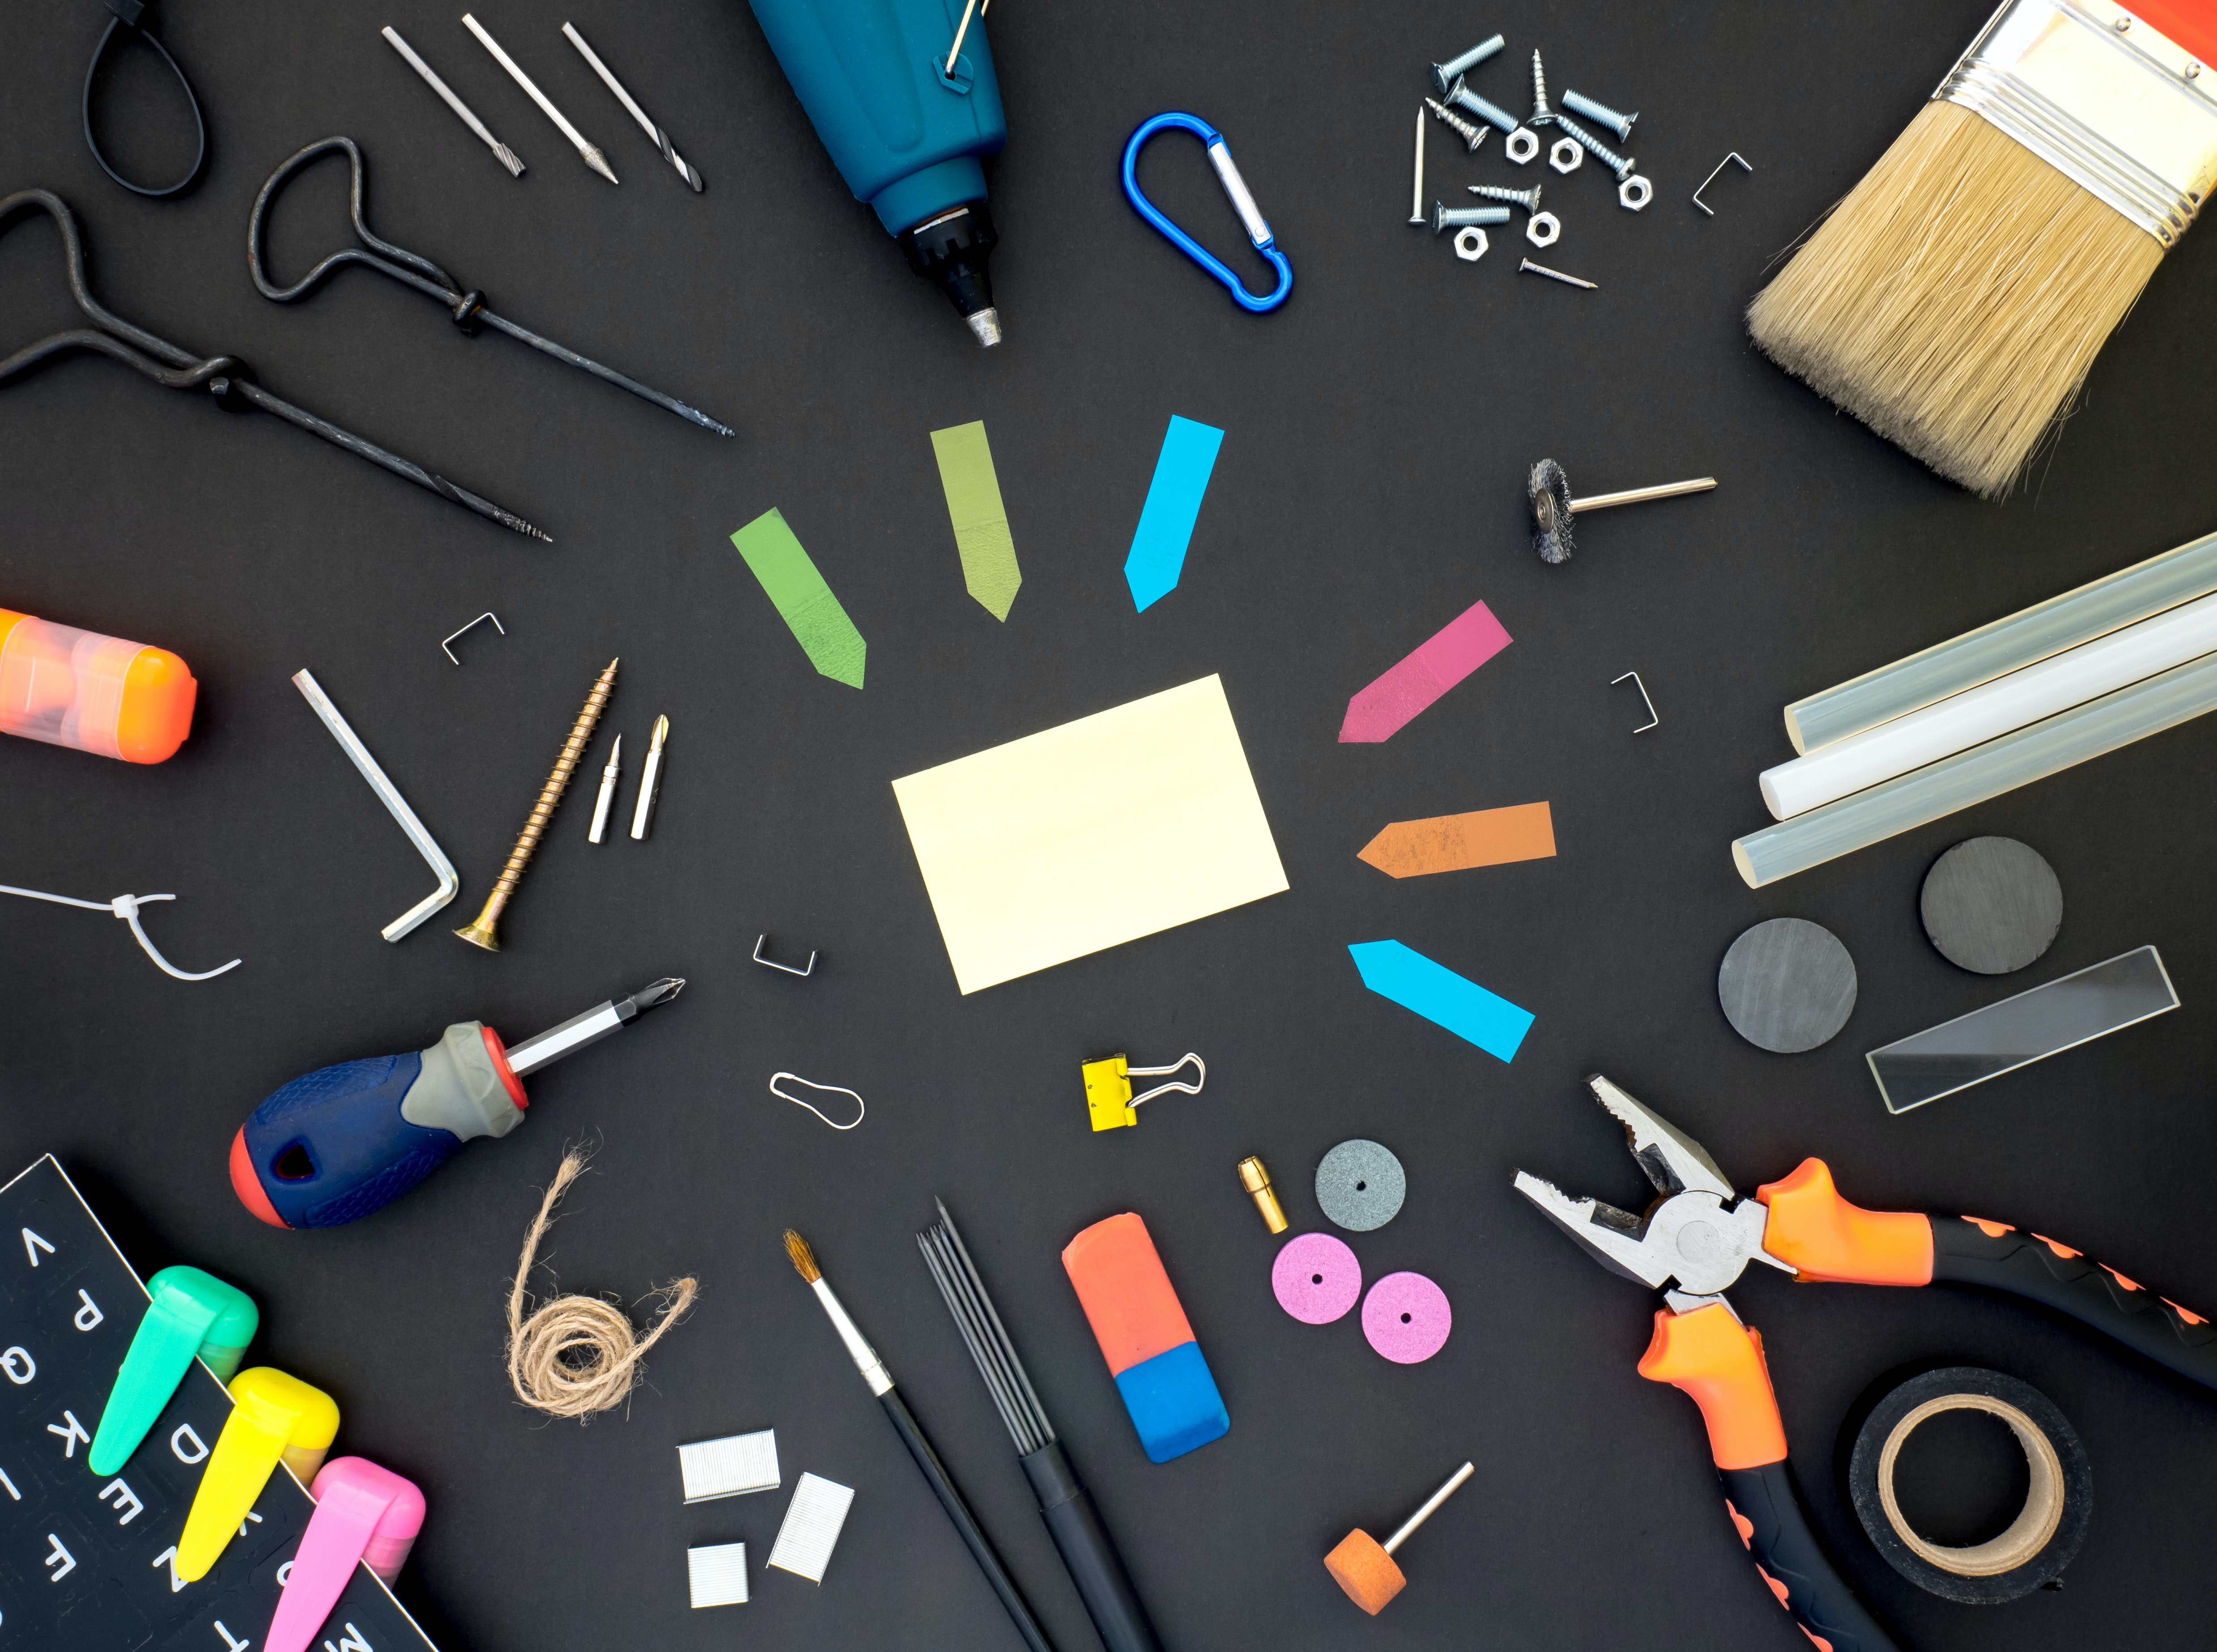 Some colourful tools and craft things on a table, by Dan Cristian Pădureț via Unsplash